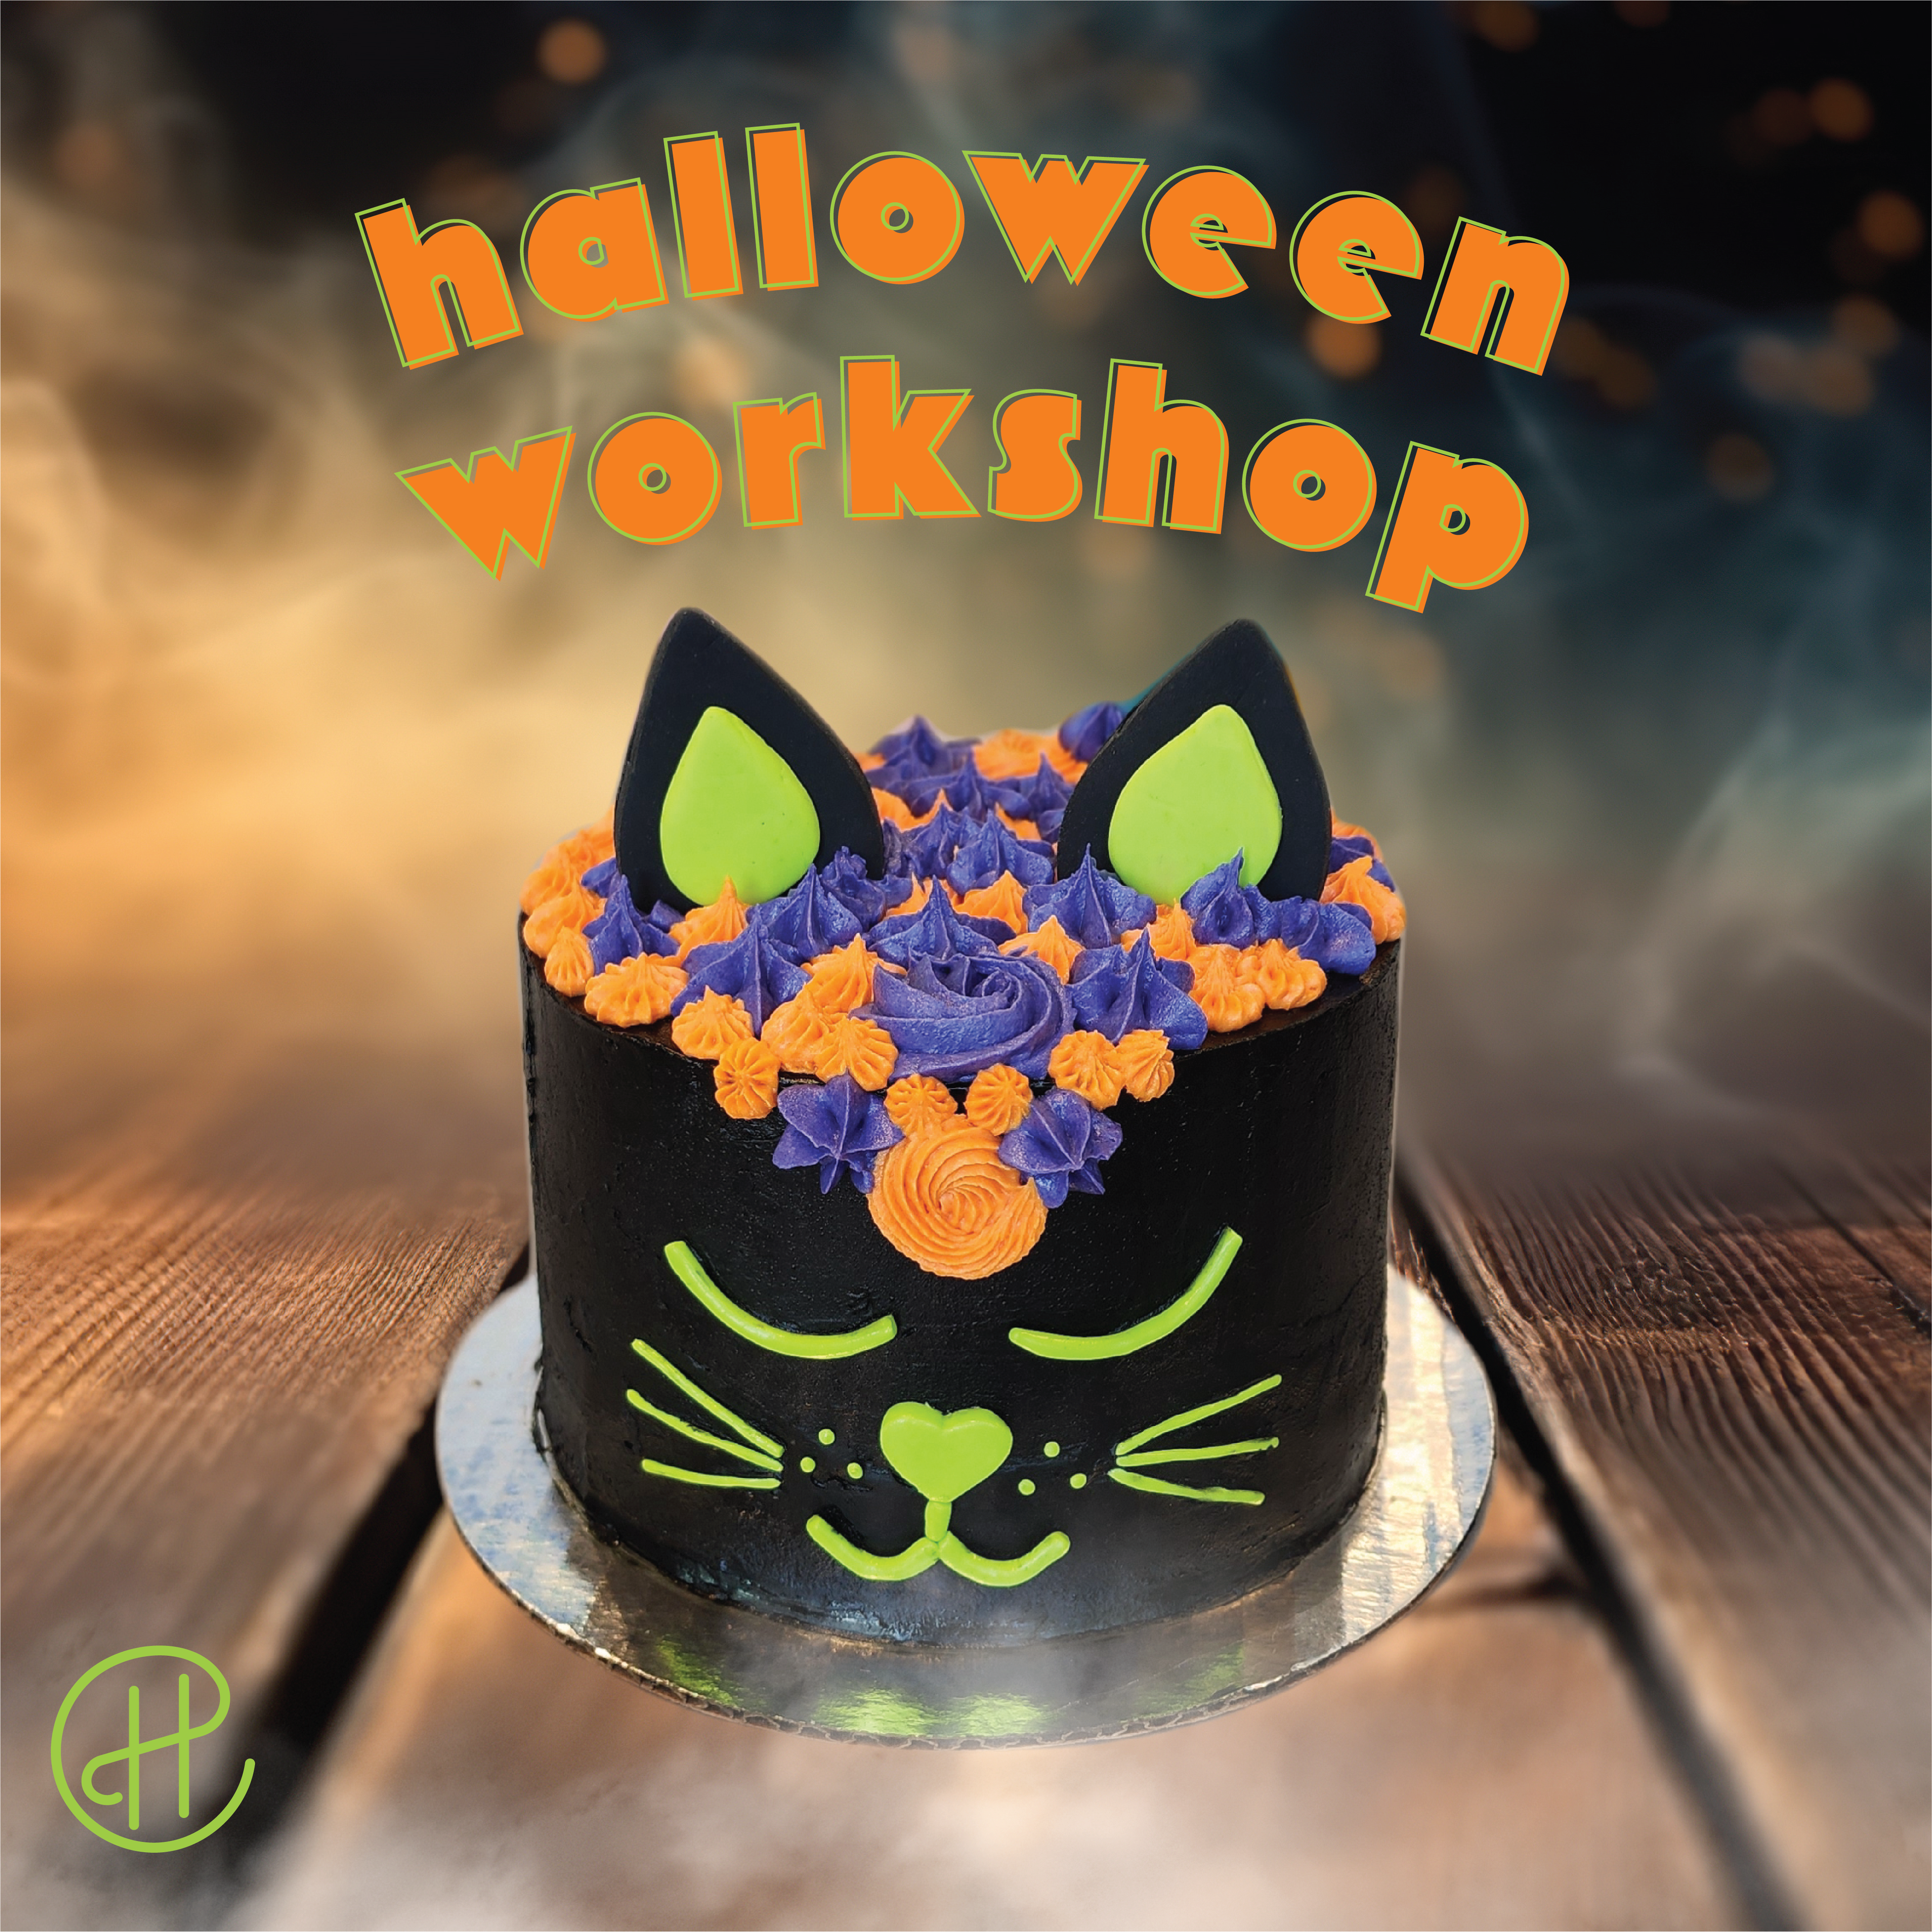 Cake Decorating and Styling Workshop, Feb 2018